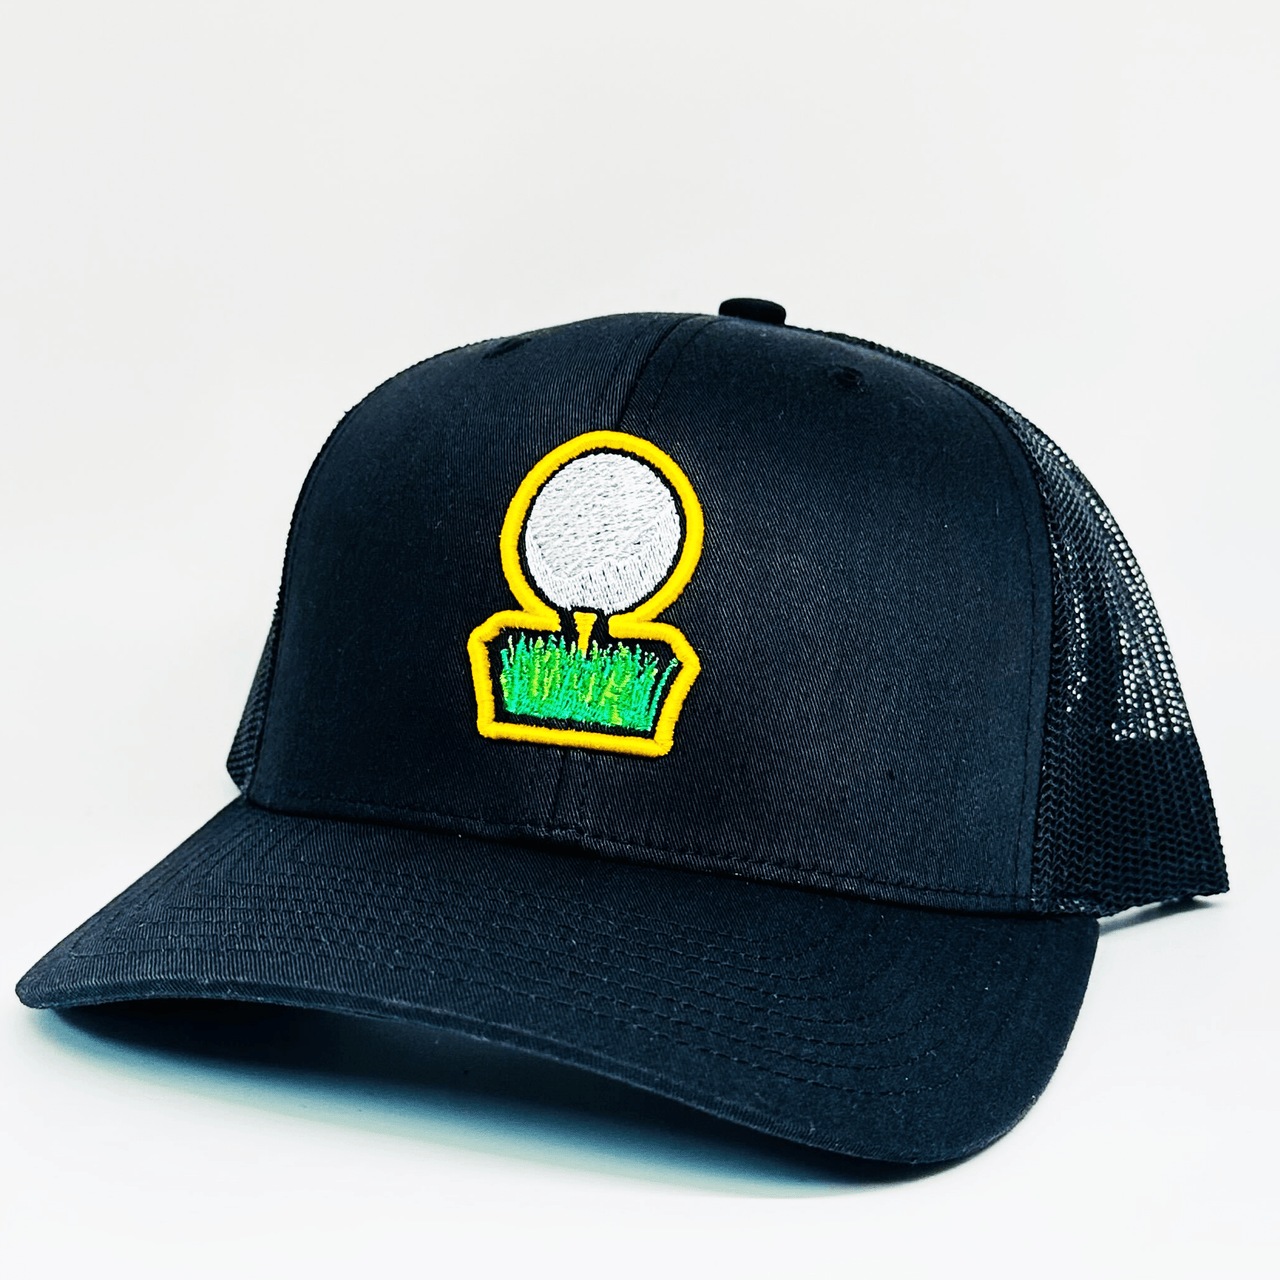 Teed Up Embroidery Hat - Greater Half